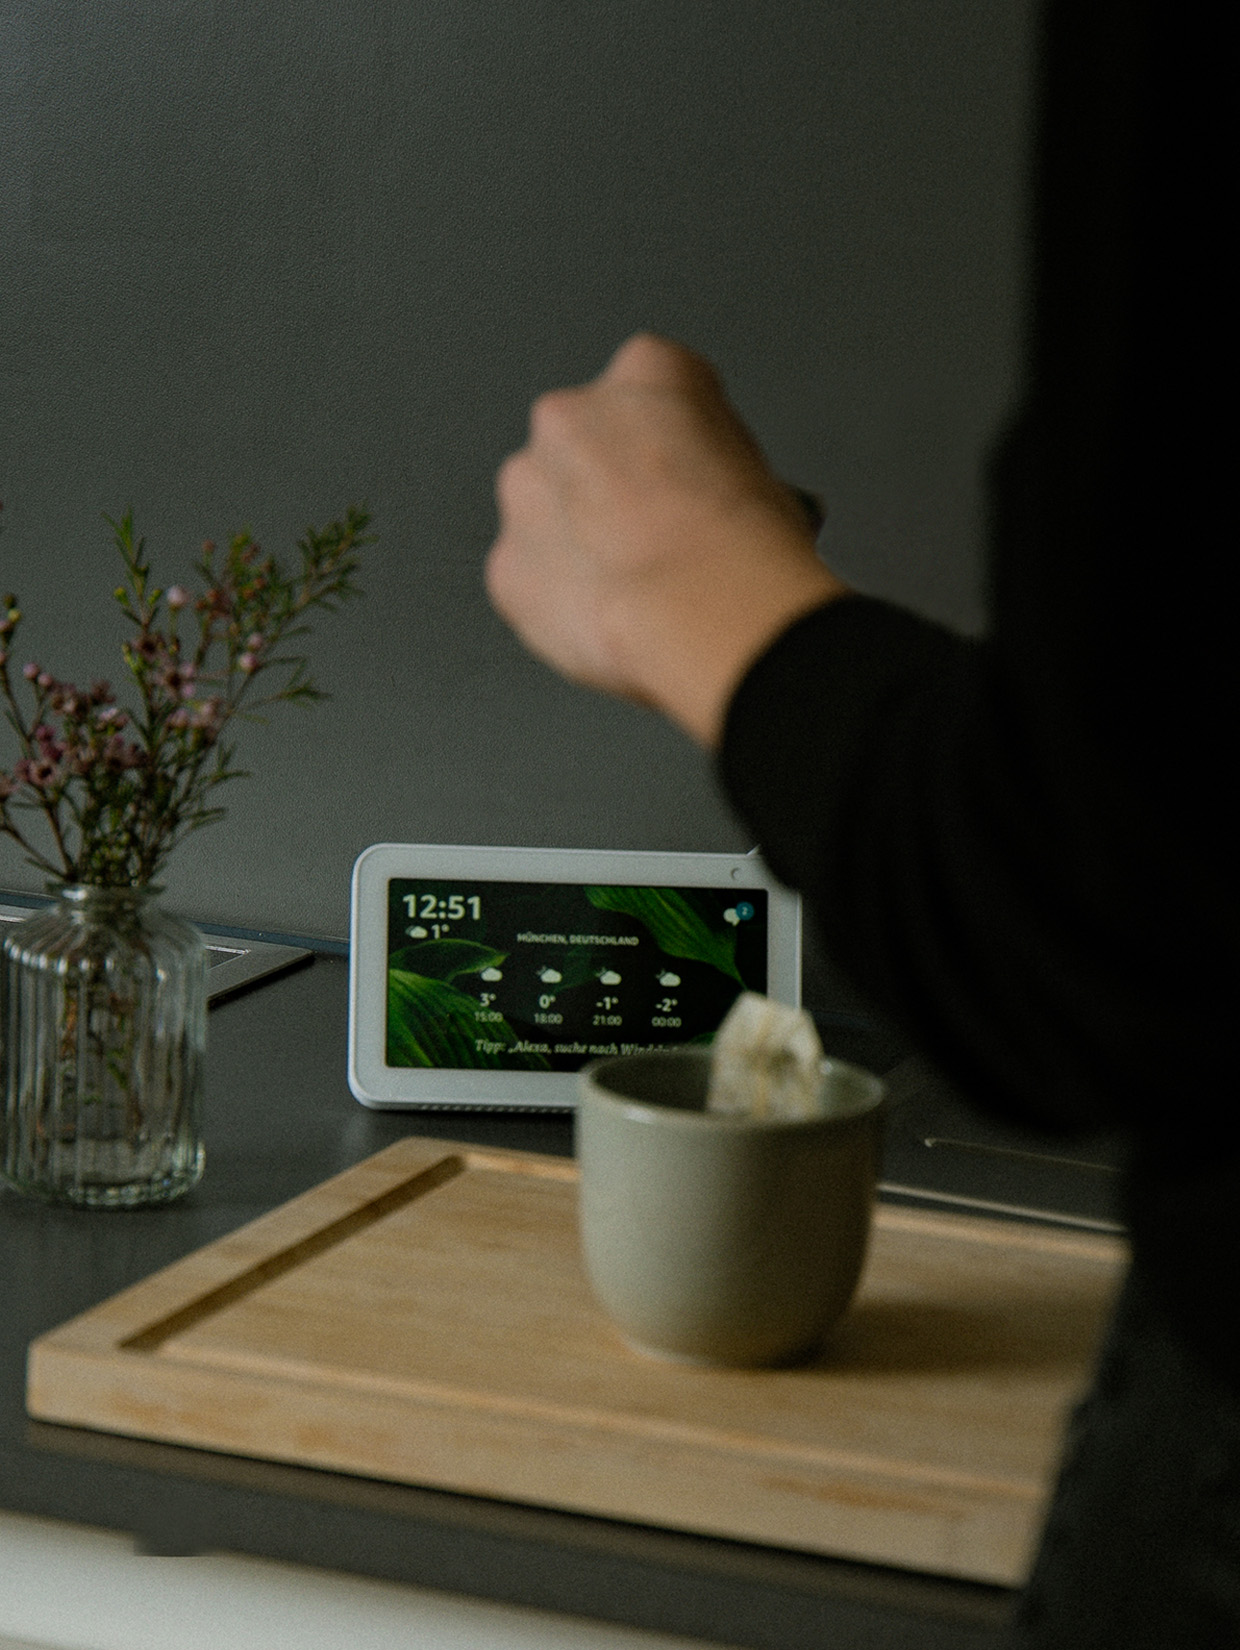 VUI.agency – Voice development – Amazon Alexa Voice Assitant, Echo show, placed on a table with person making tea and asking for the weather